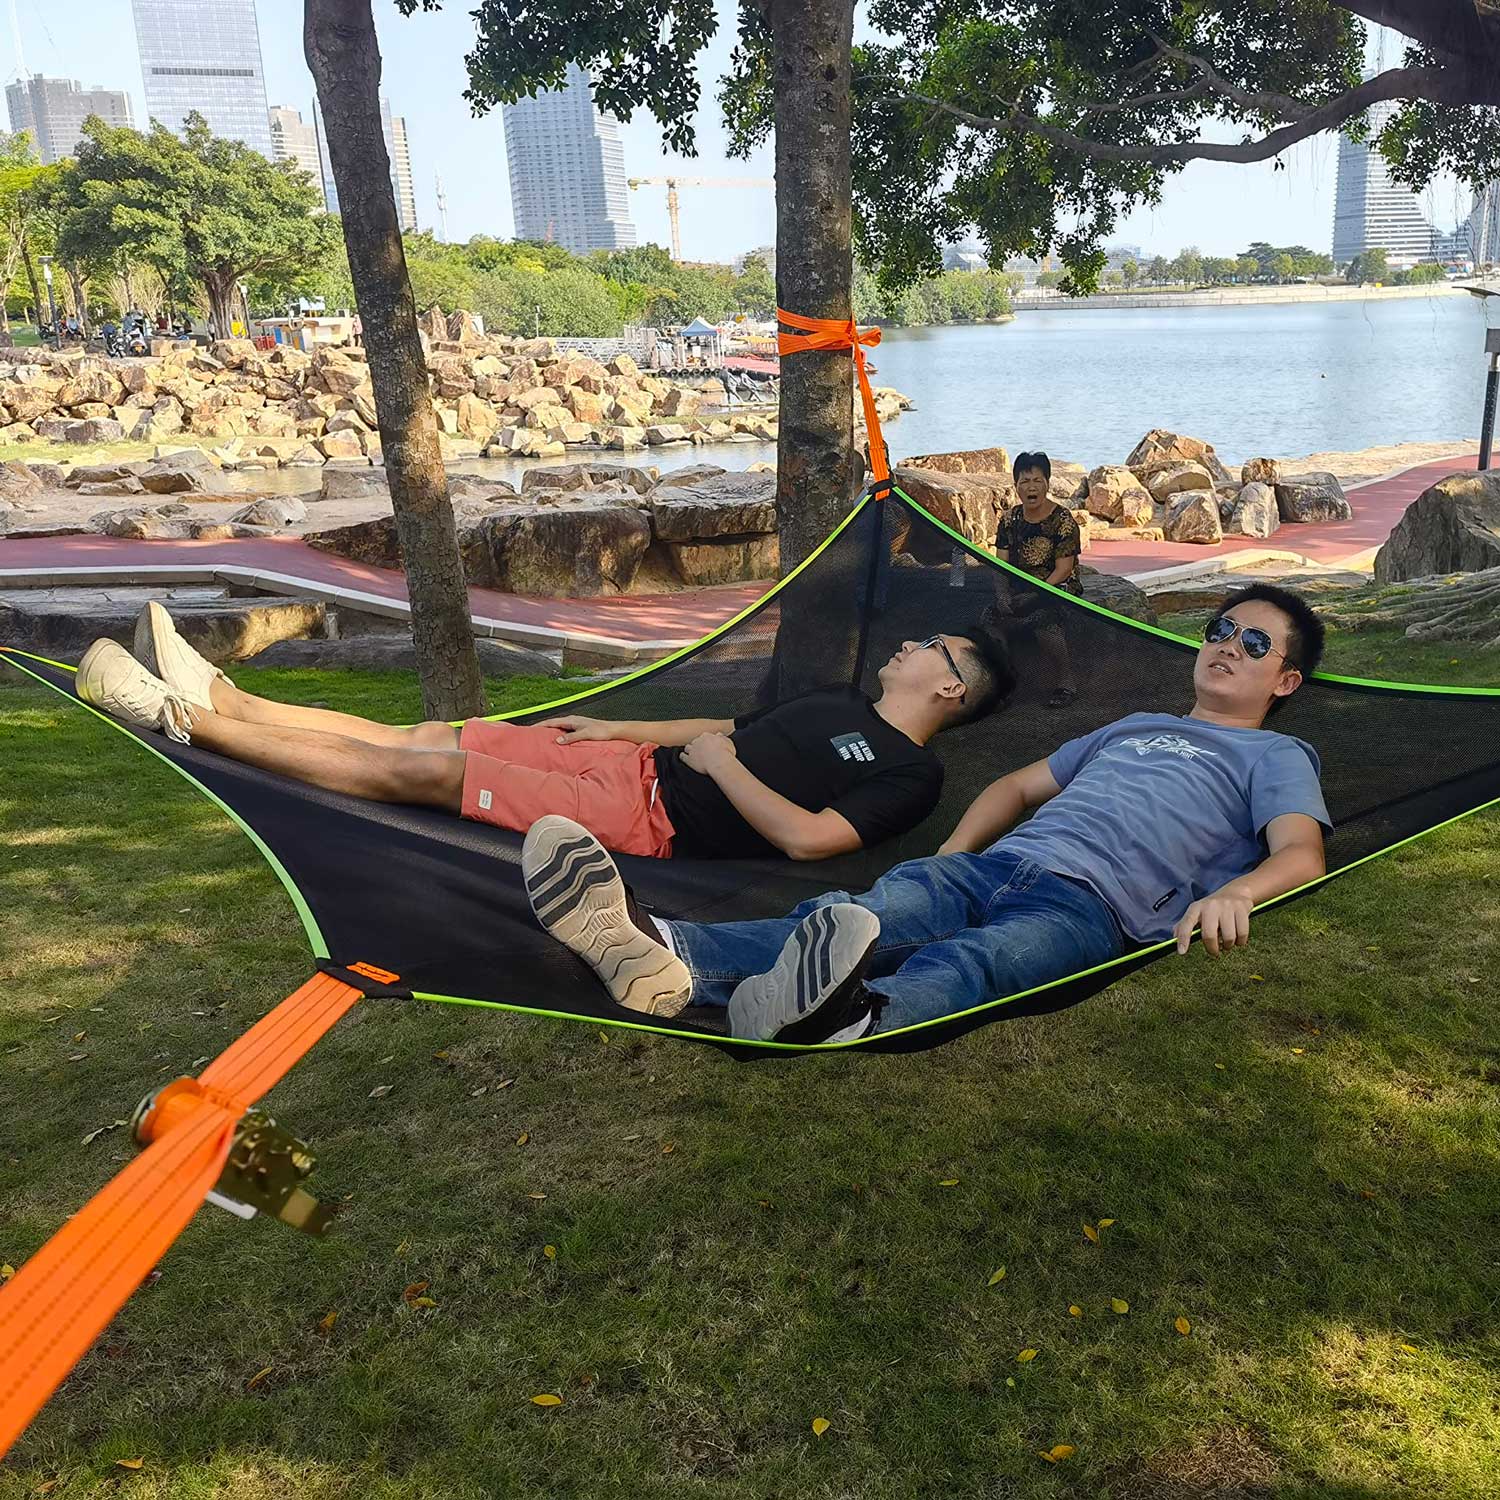 HARD LAND Portable Camping Hammock 2-4 Person Hommock for Family